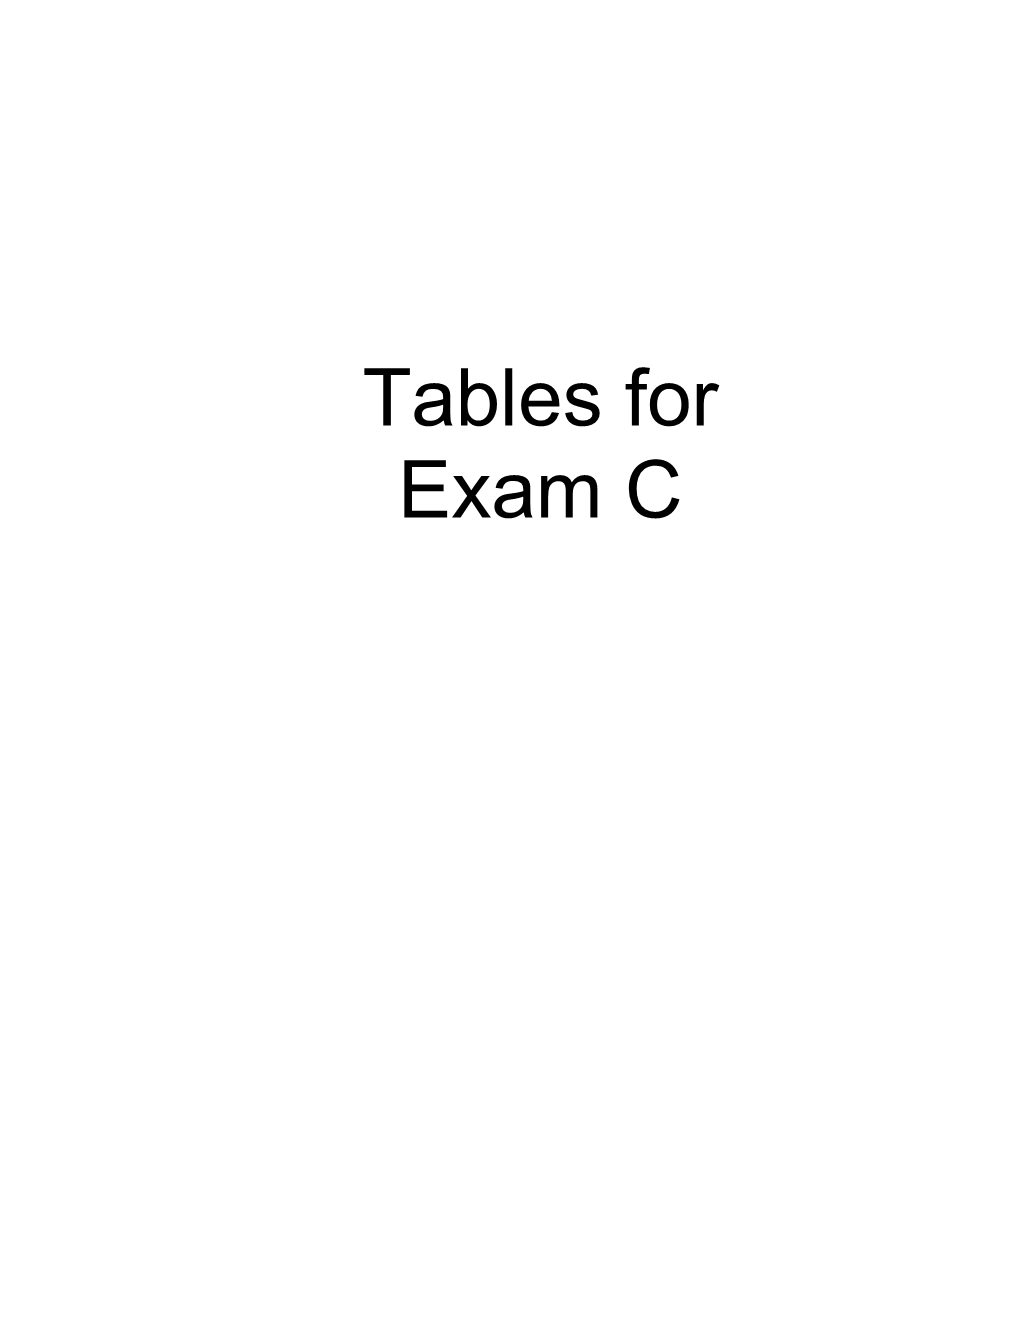 Tables for Exam C the Reading Material for Exam C Includes a Variety of Textbooks